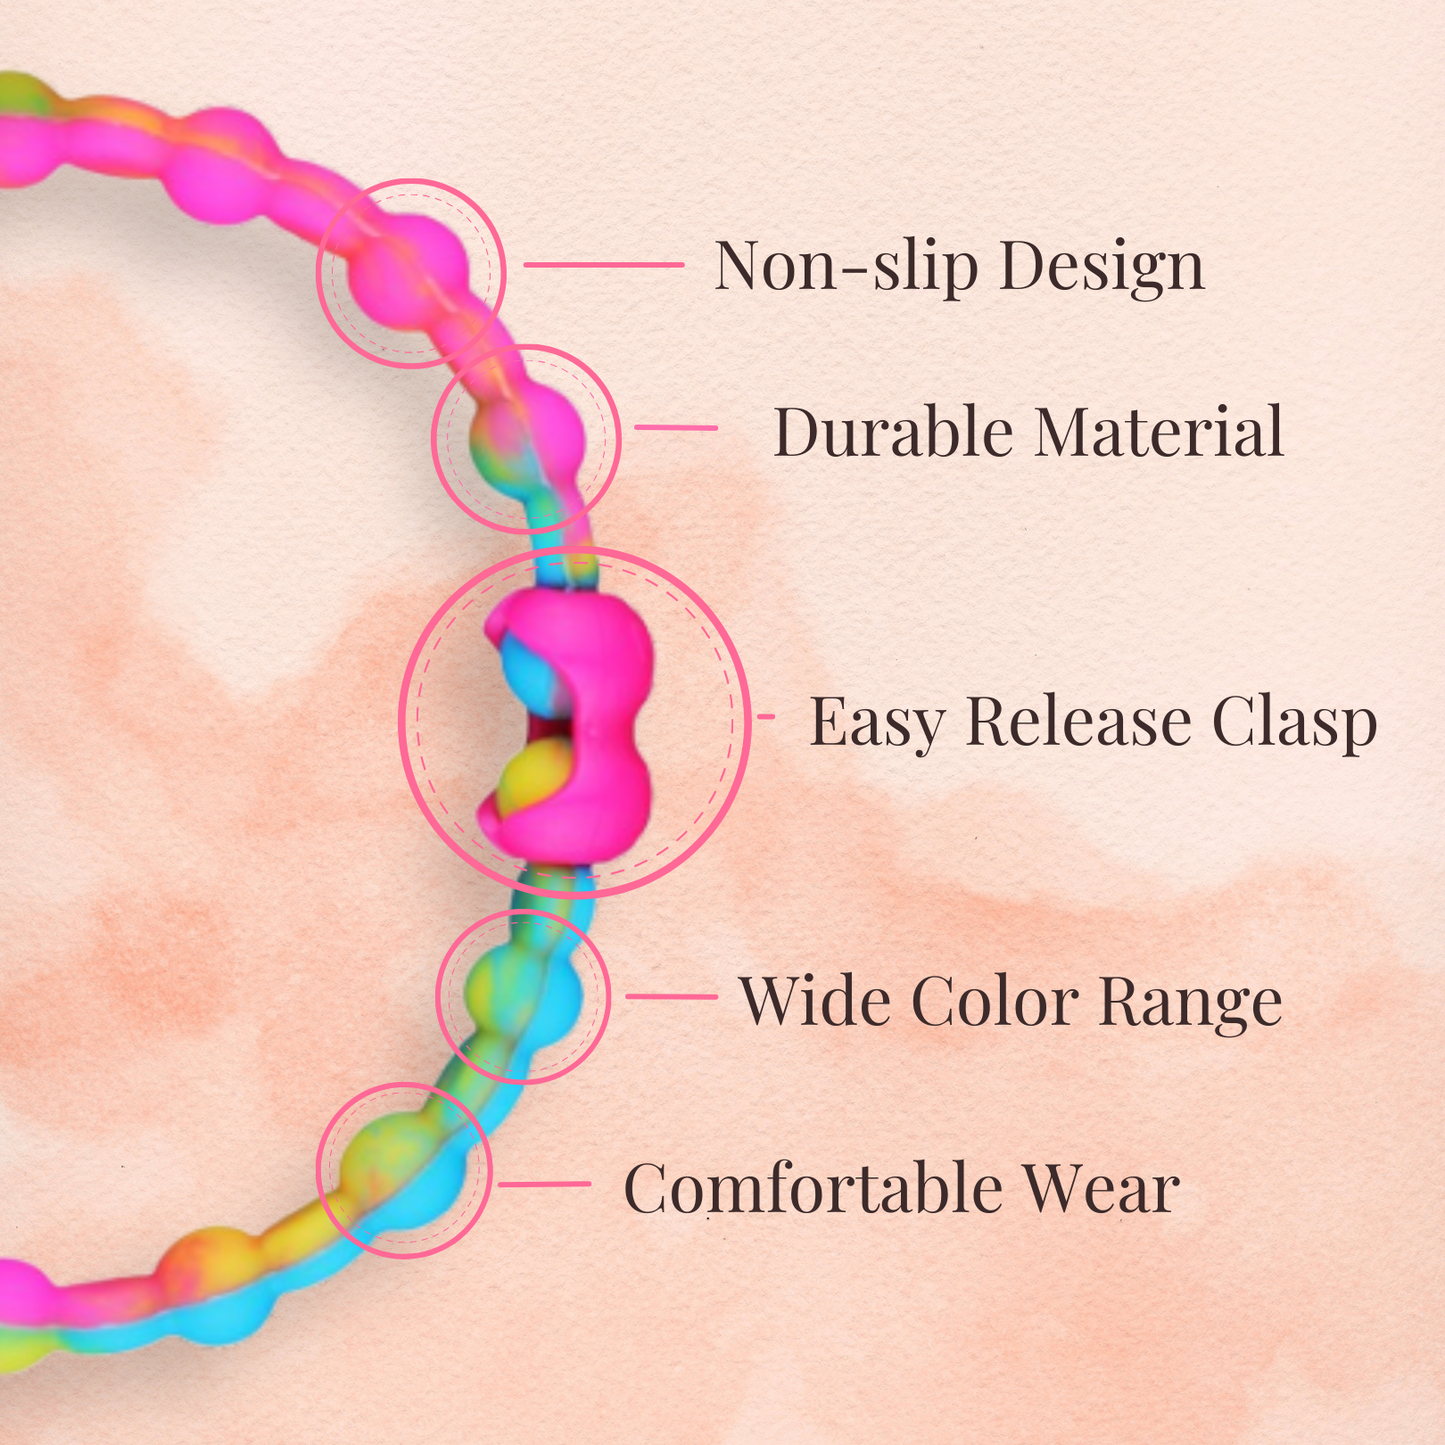 Frosty Morning Pack PRO Hair Ties (6-Pack): A Refreshing Start for Your Hair